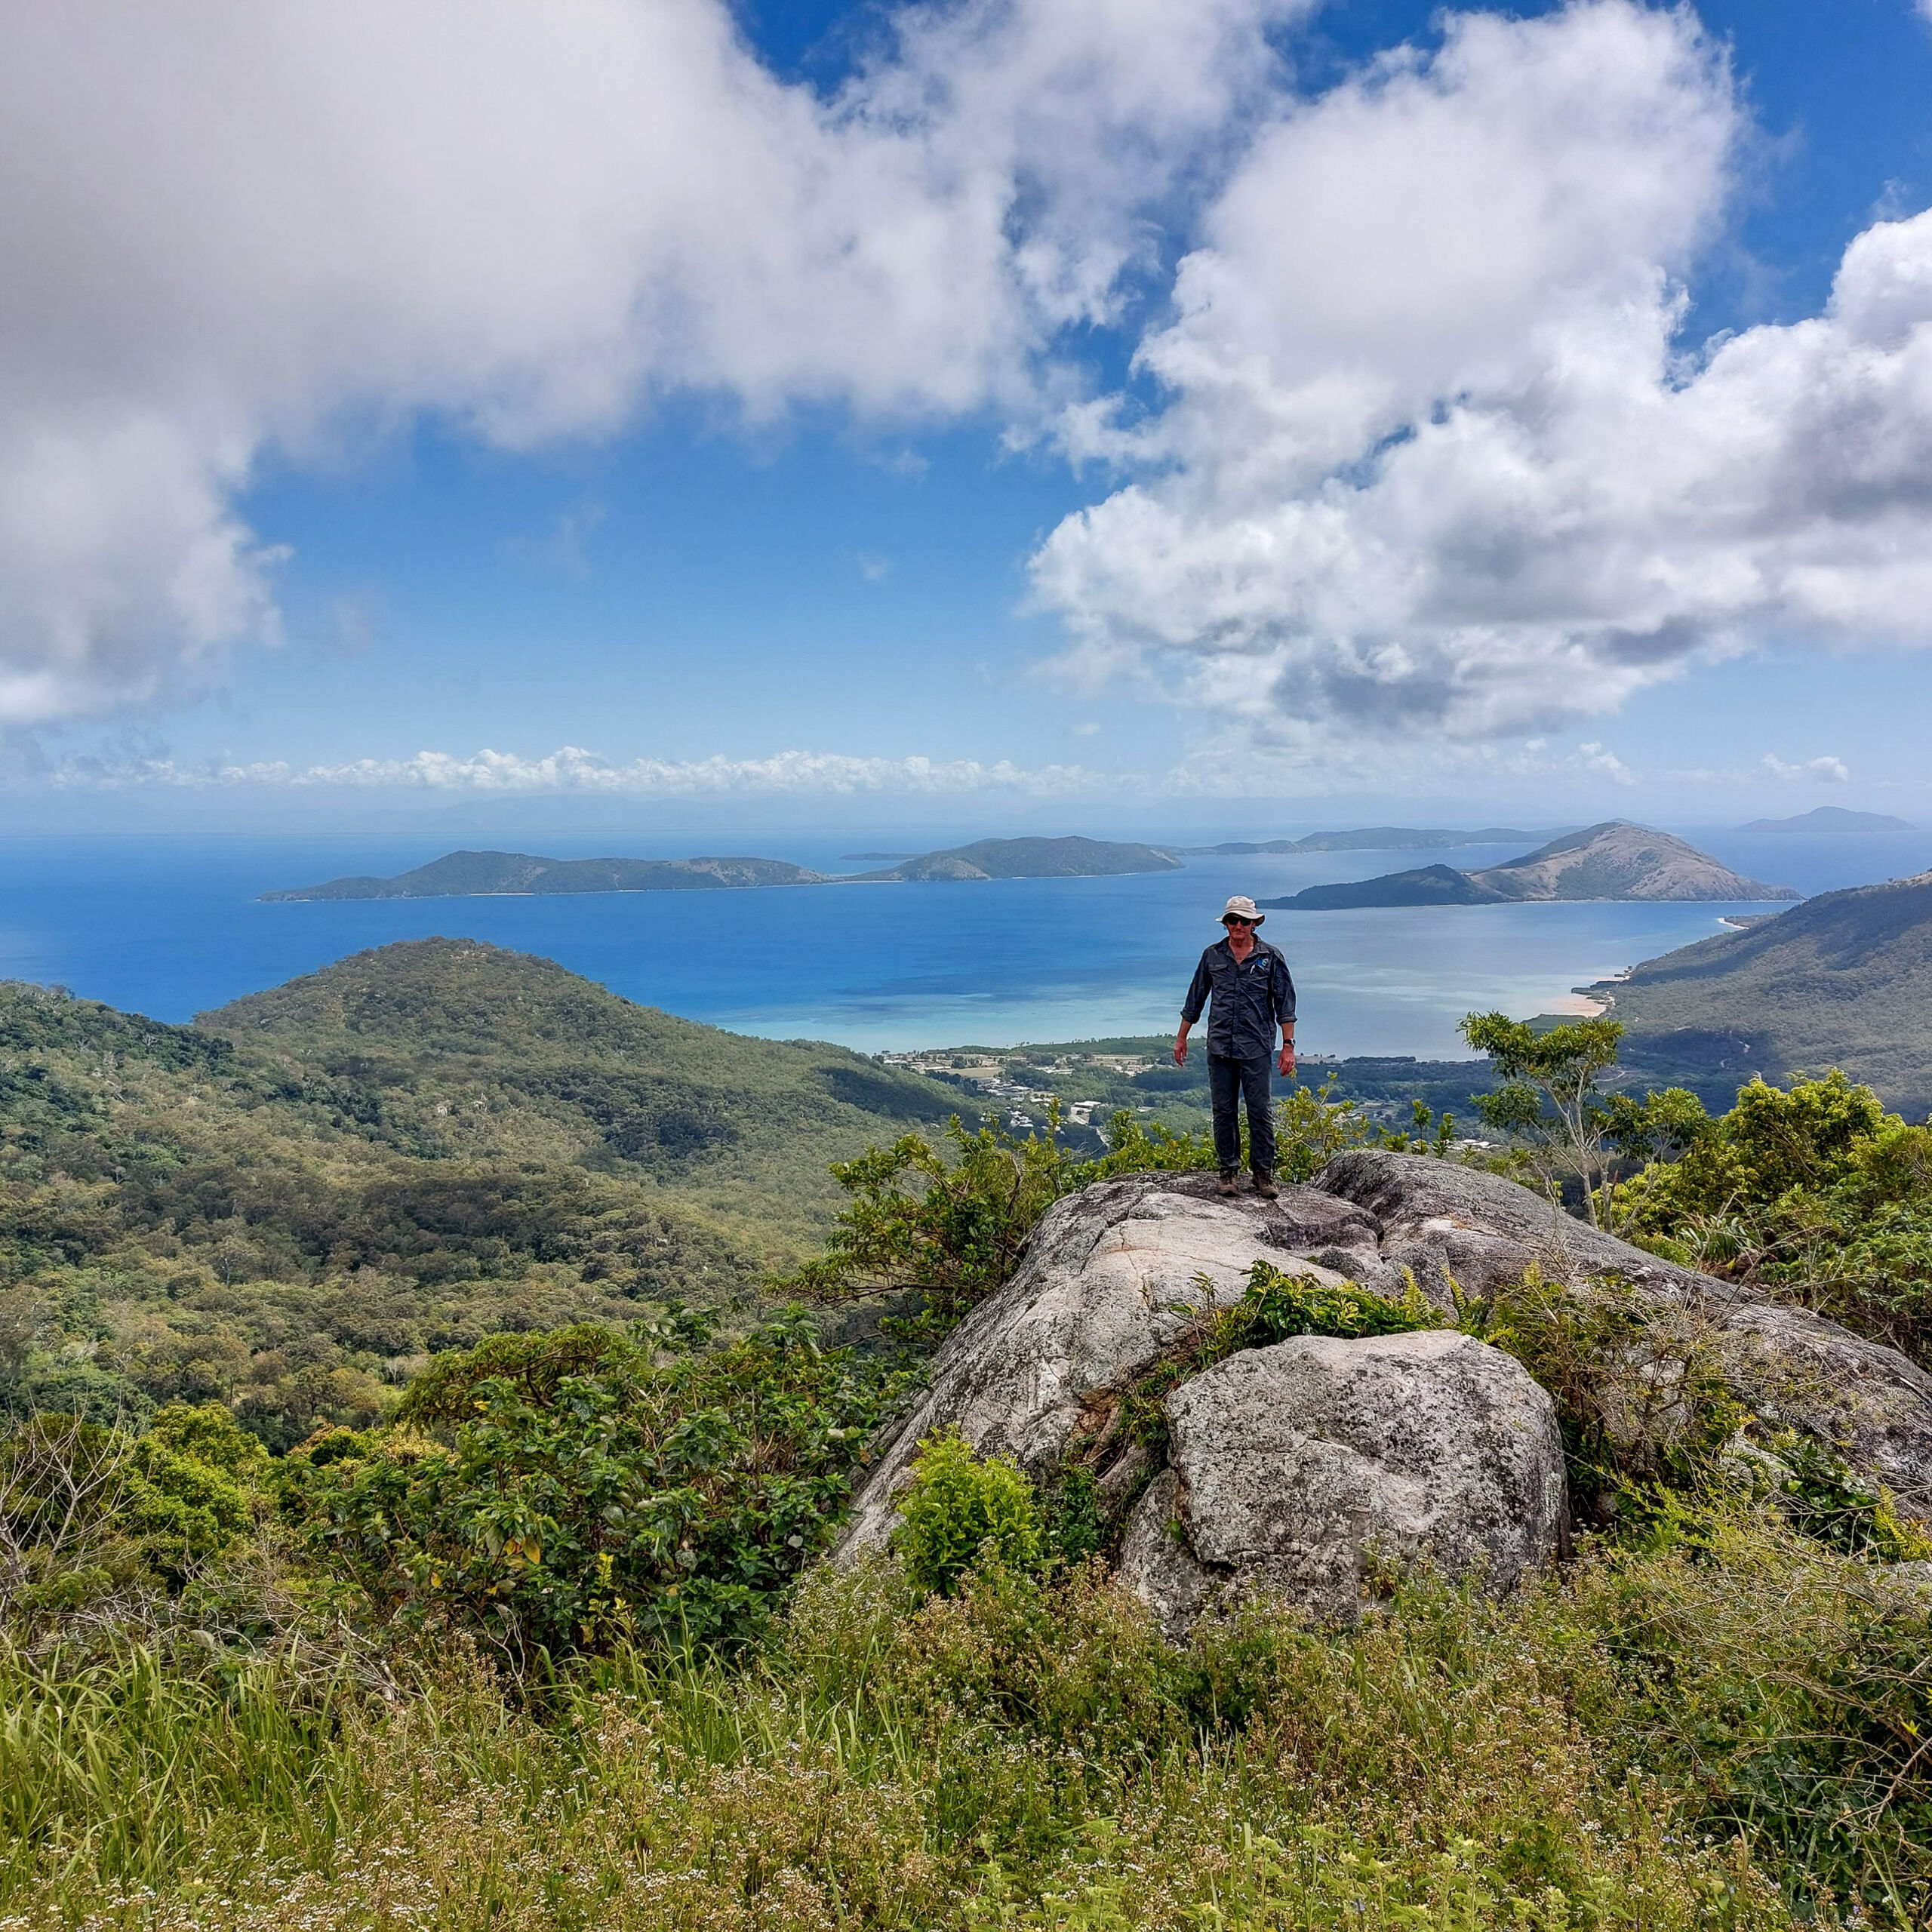 Chris Halstead pictured standing ontop of a rock. Behind him a stunning view of the beaches of Palm Island.